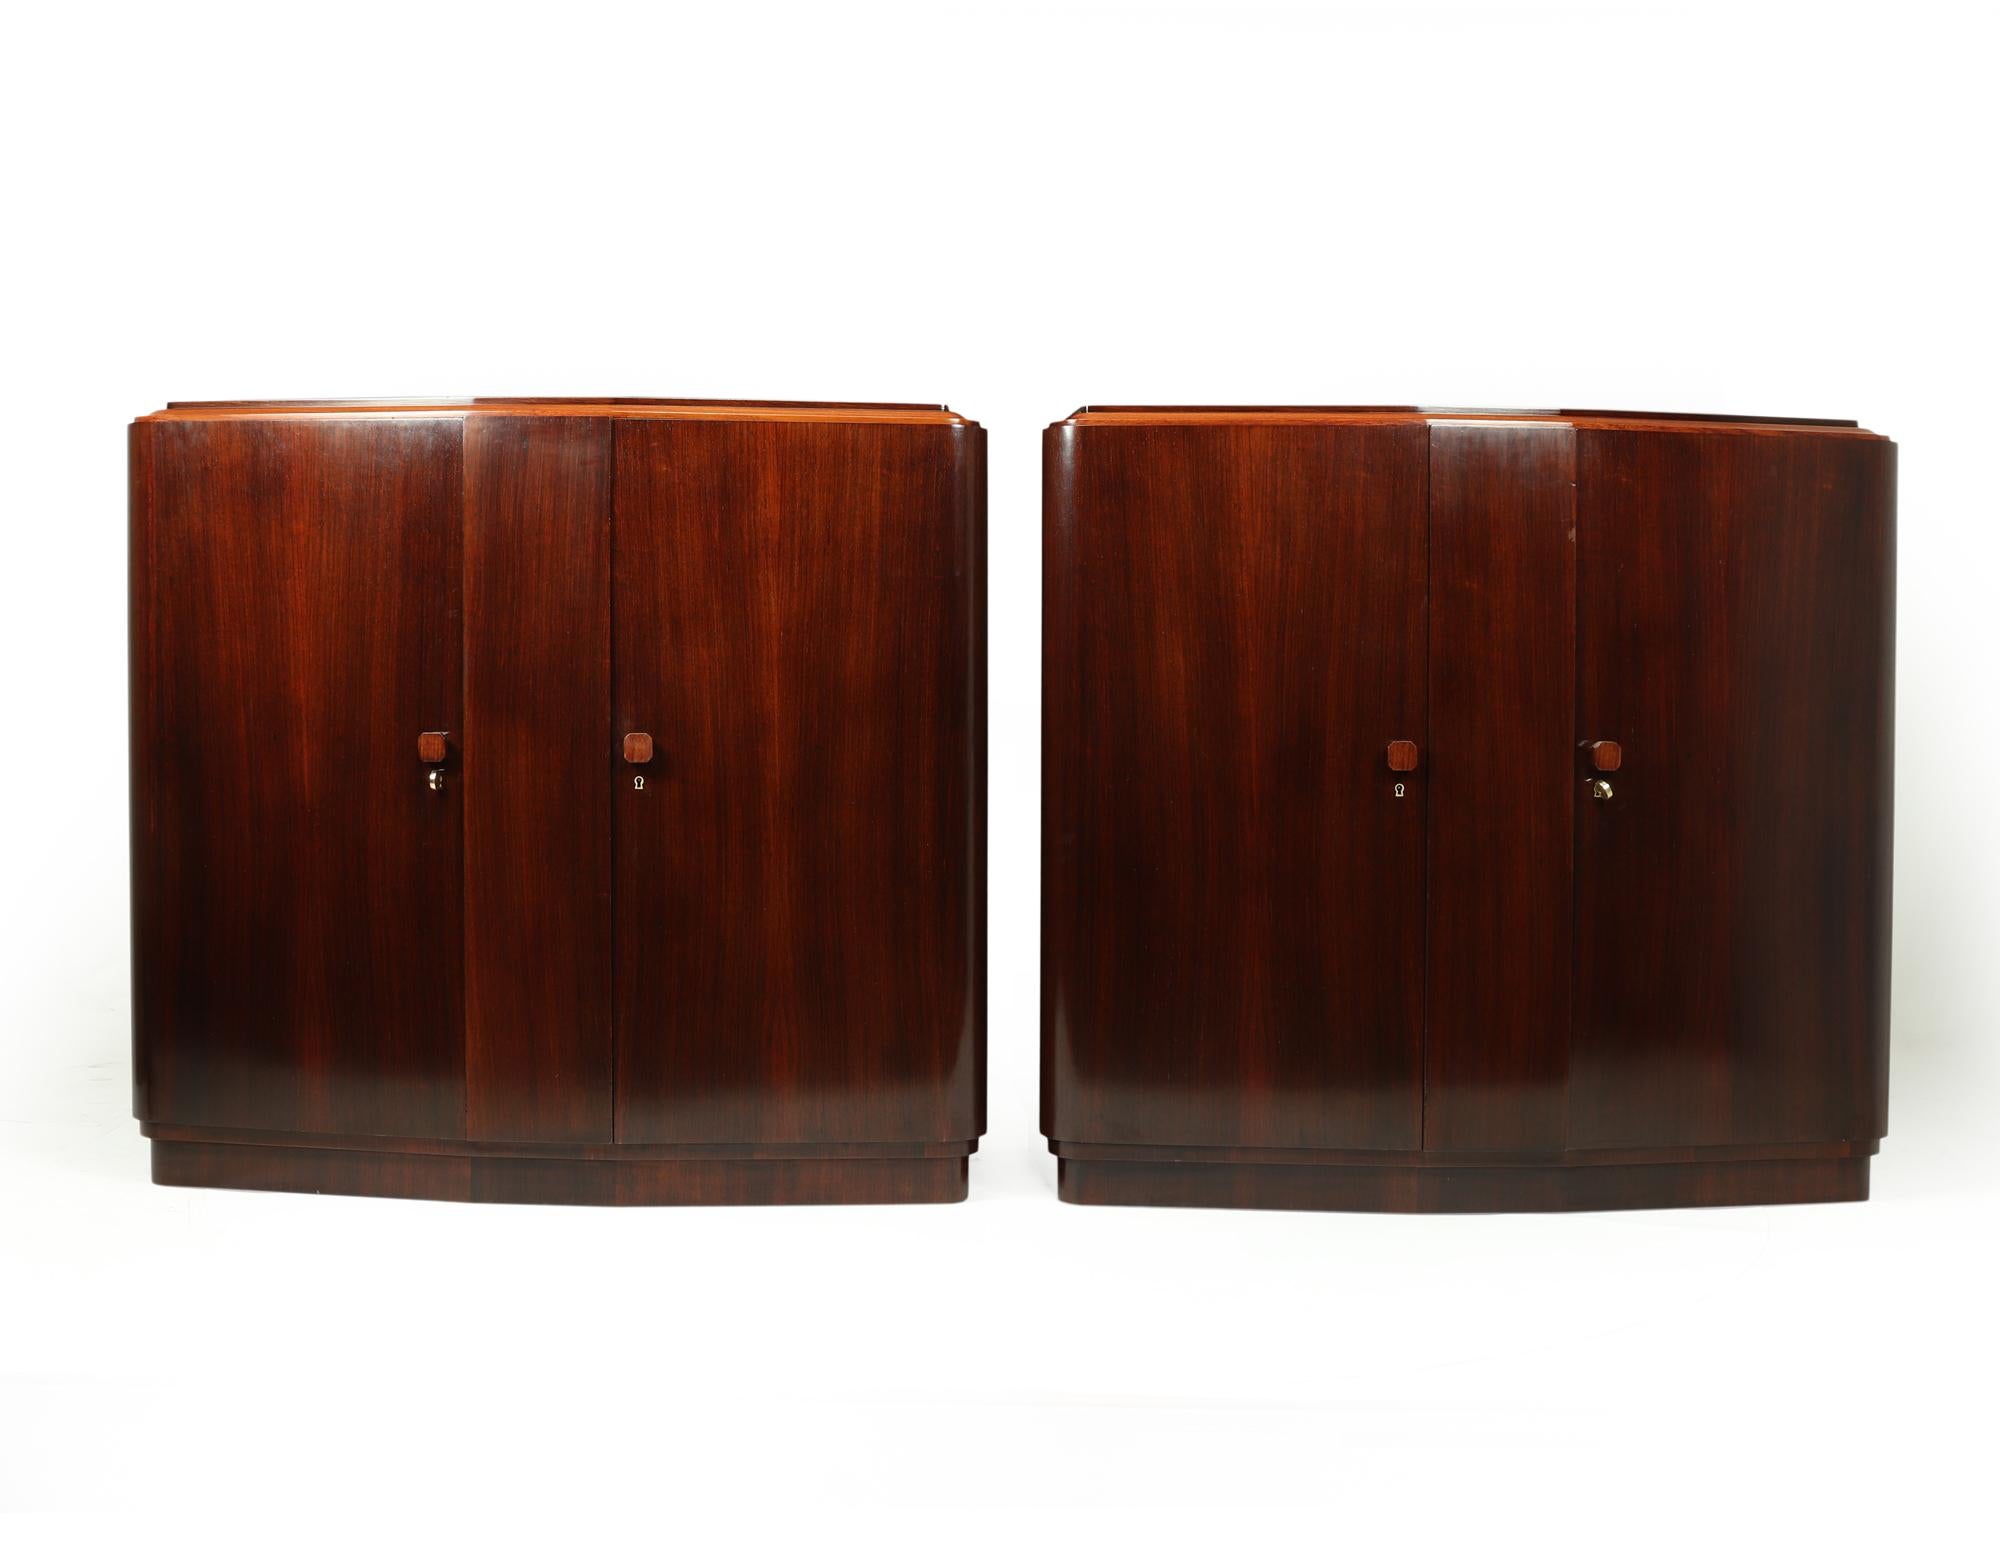 An identical pair of high quality sideboards in rosewood, (one sideboard has drawers behind) with slightly shaped fronts shaped wooden handles and lockable doors, doors open to reveal shelves behind one key with each sideboard

Age: 1930

Style: